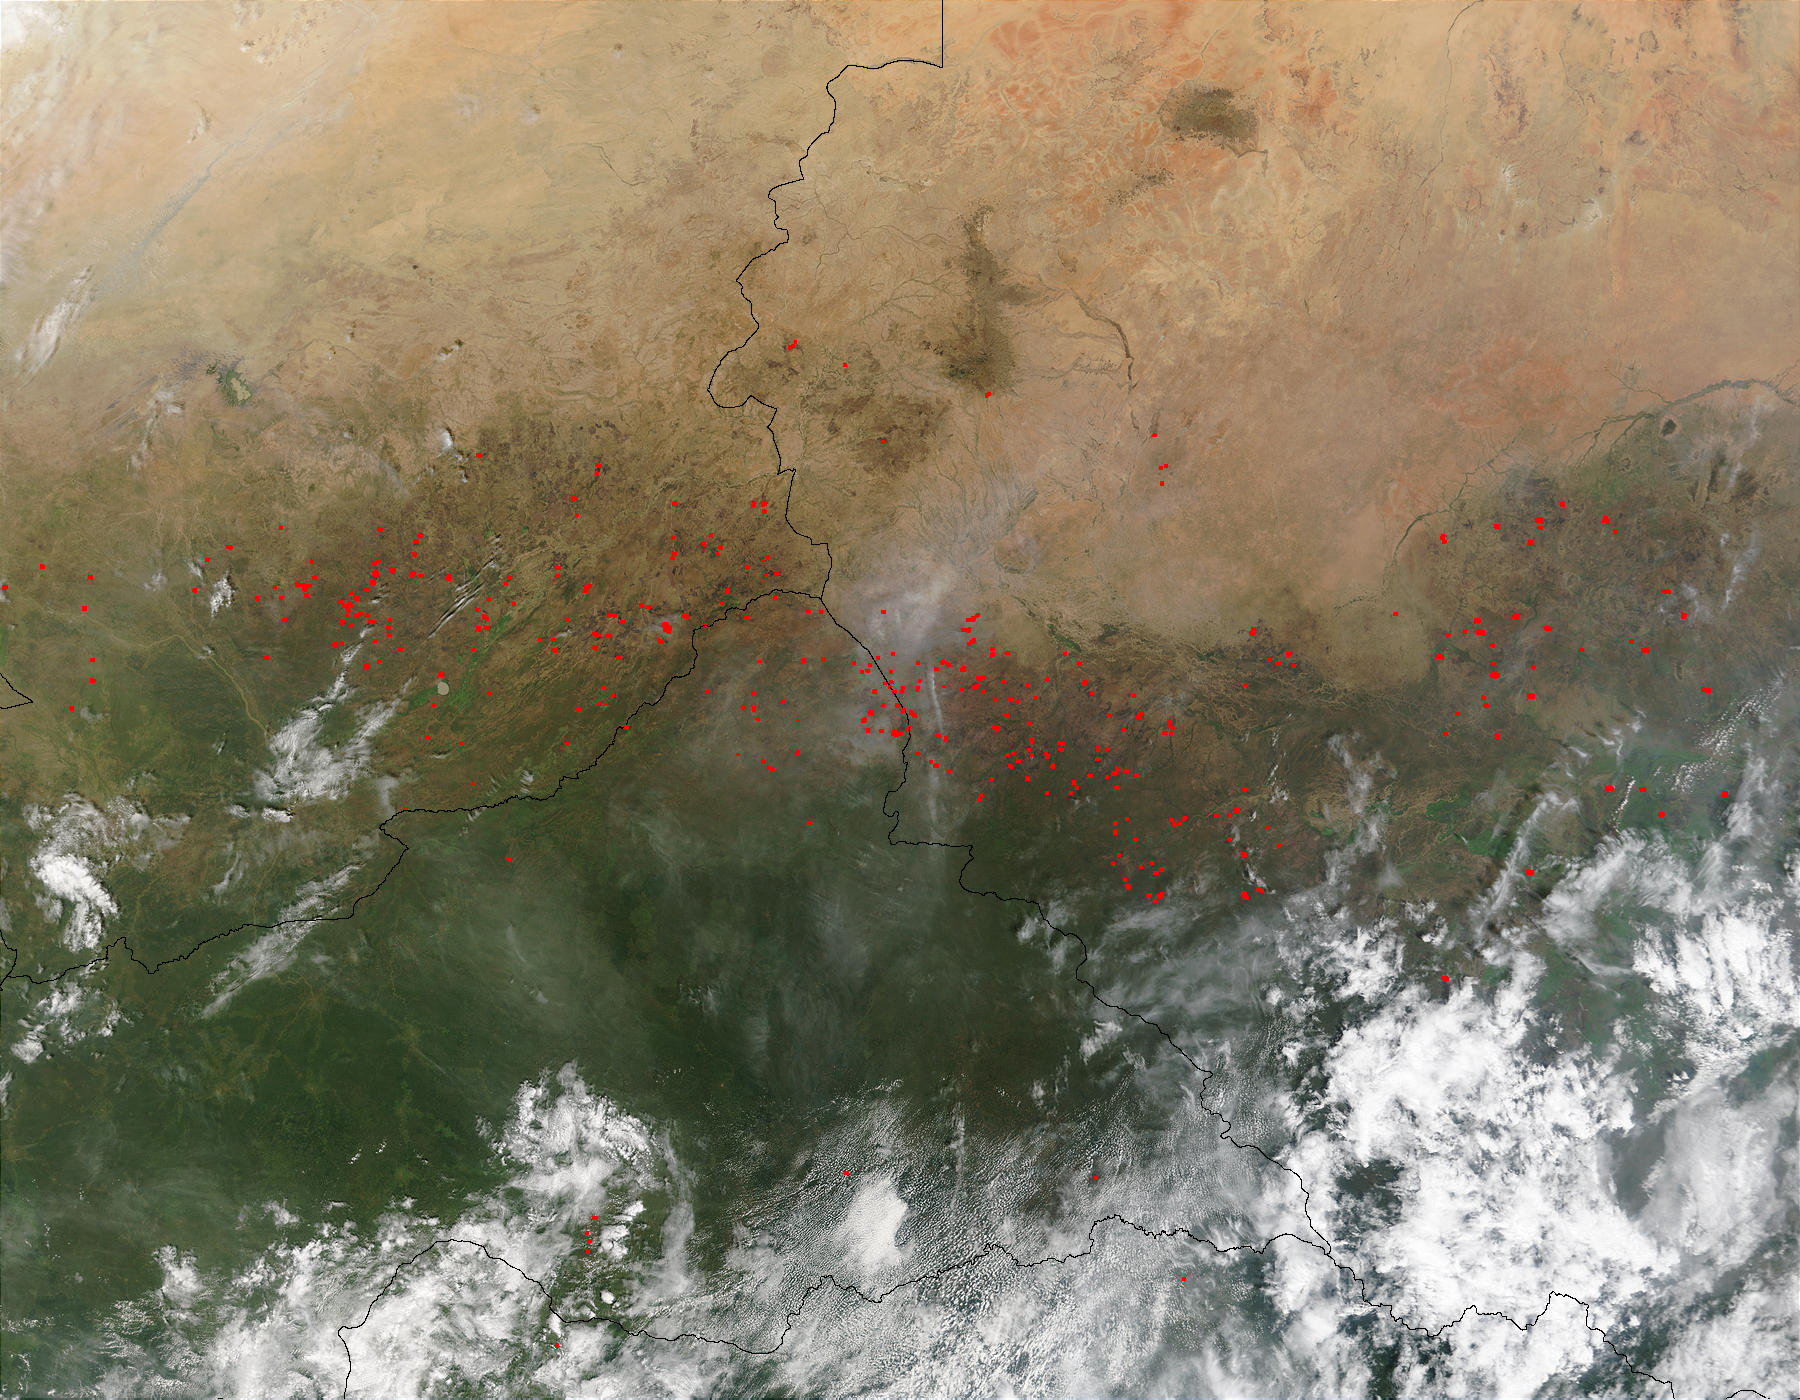 Fires in the Sahel and Savannas, Central Africa - related image preview